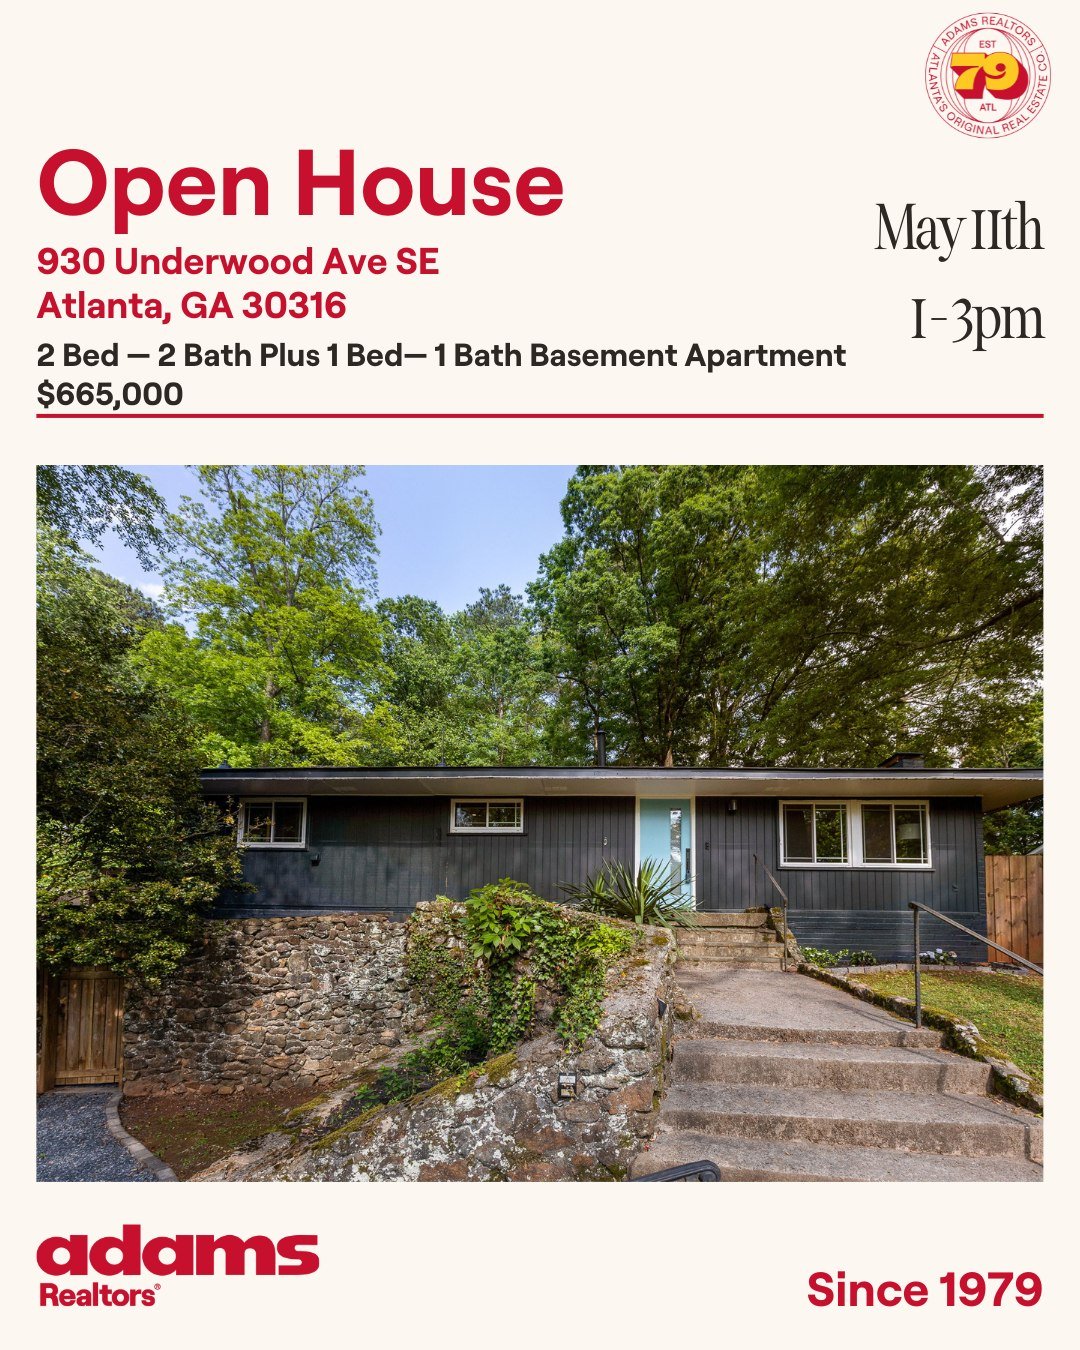 Open House Saturday, May 11th from 1-3pm in Ormewood Park! 930 Underwood Ave 2 BR | 2 BA plus 1 BR | 1 BA Basement Apartment $665,000

Live in Stunning Mid Century Ranch just blocks from the new Beltline Bridge on United Ave. Pull up the drive and yo